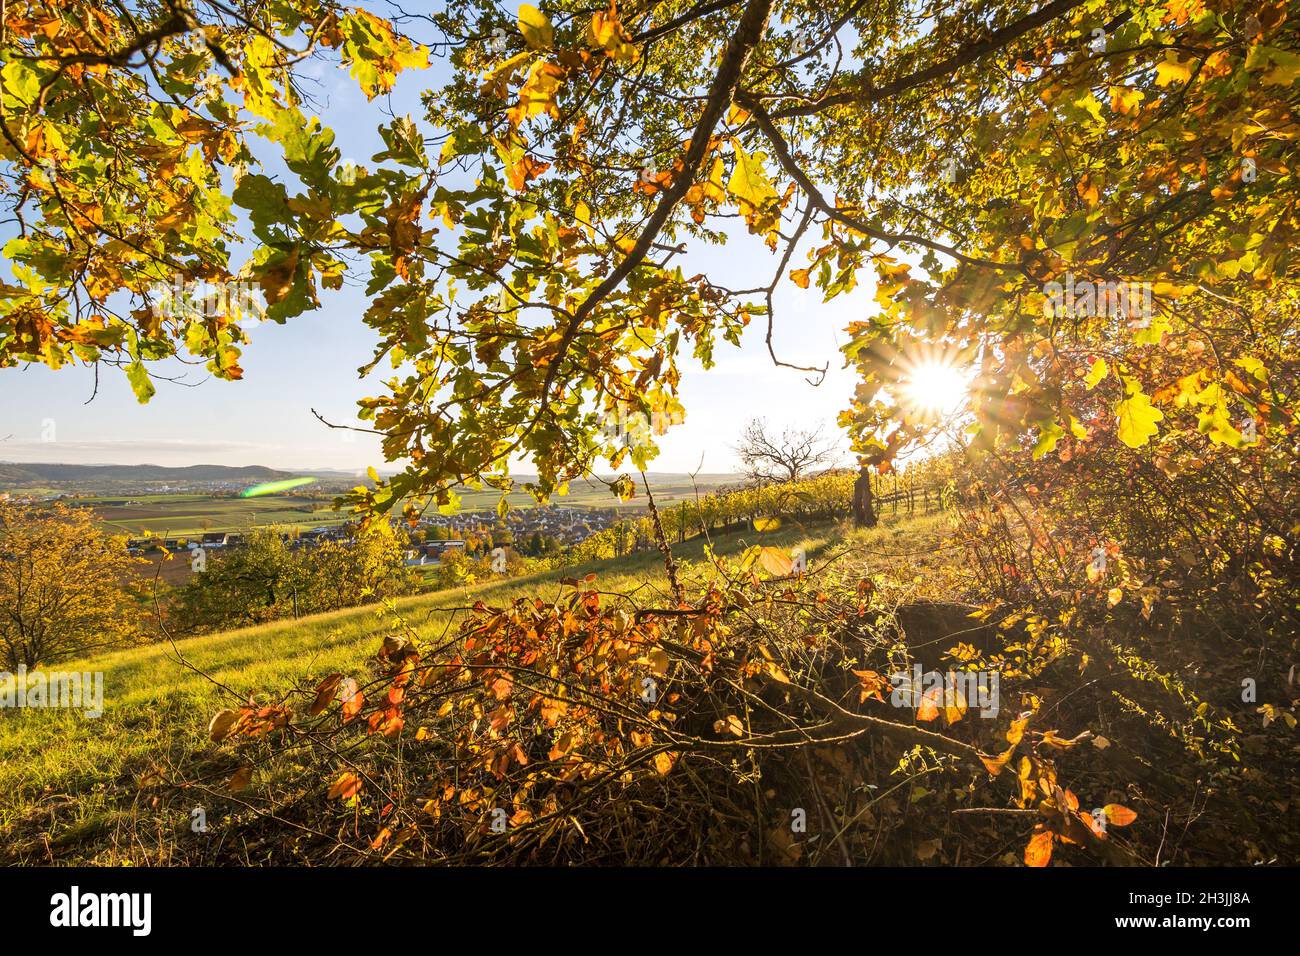 Sun shining through the colourful leaves of a tree on a vineyard in beautiful autumn landscape Stock Photo